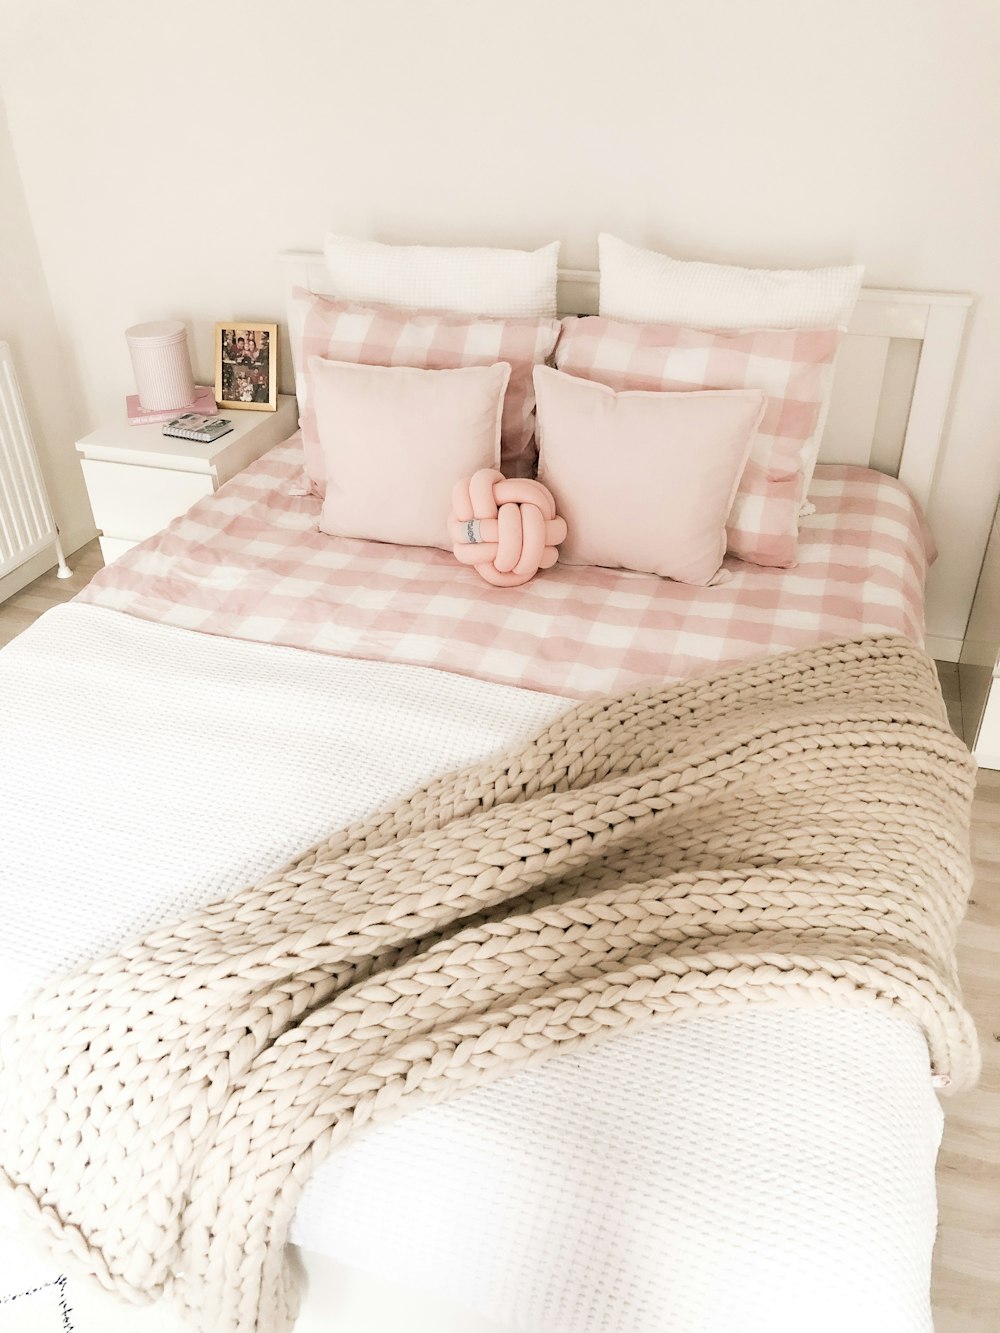 brown knitted blanket on bed with pillows